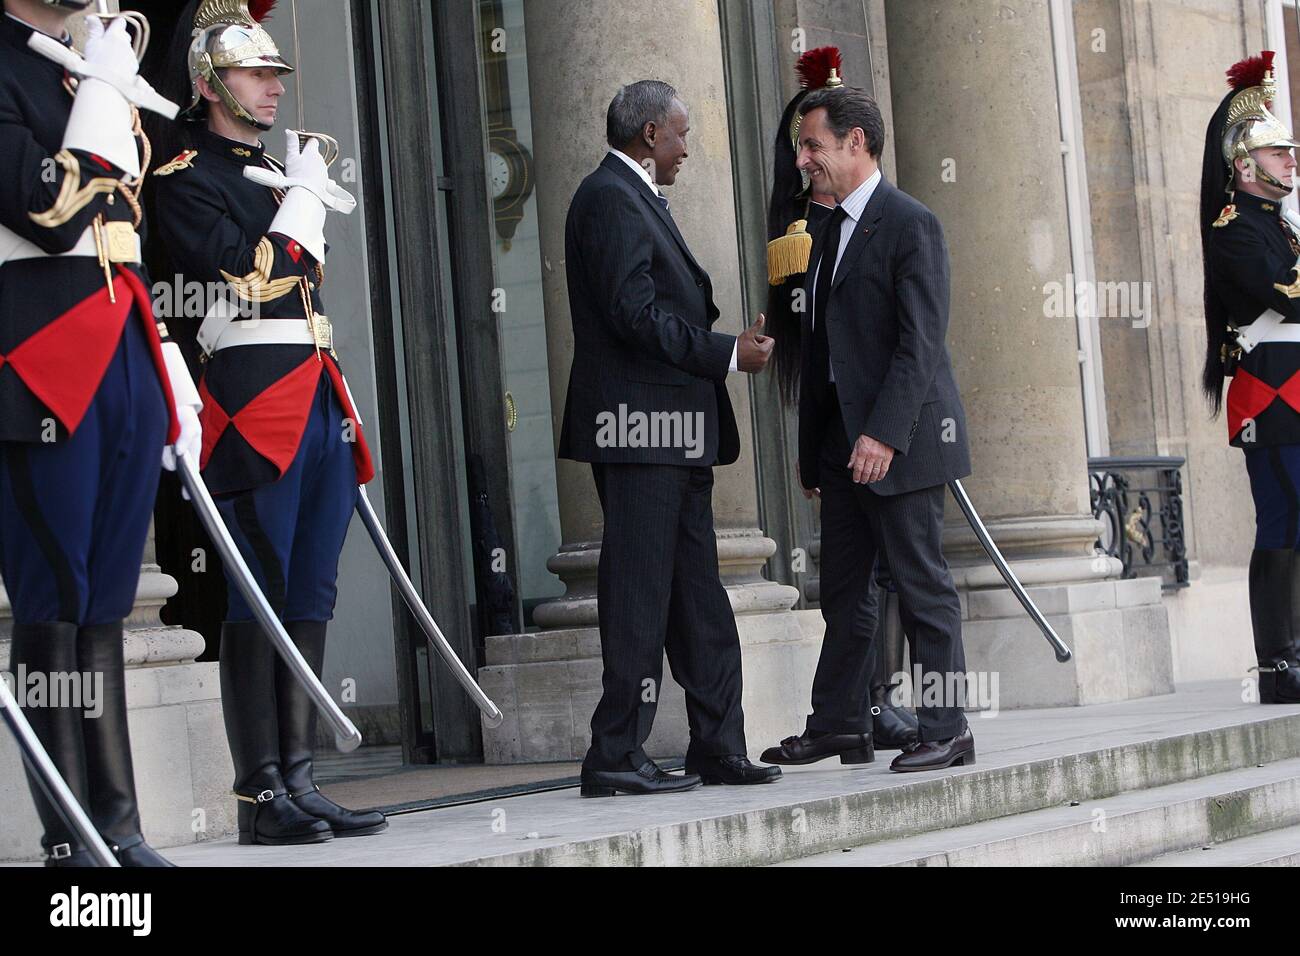 French President Nicolas Sarkozy welcomes Somalia's President Abdullahi Yusuf Ahmed at the Elysee Palace in Paris May 5, 2008. Photo by Mousse/ABACAPRESS.COM Stock Photo